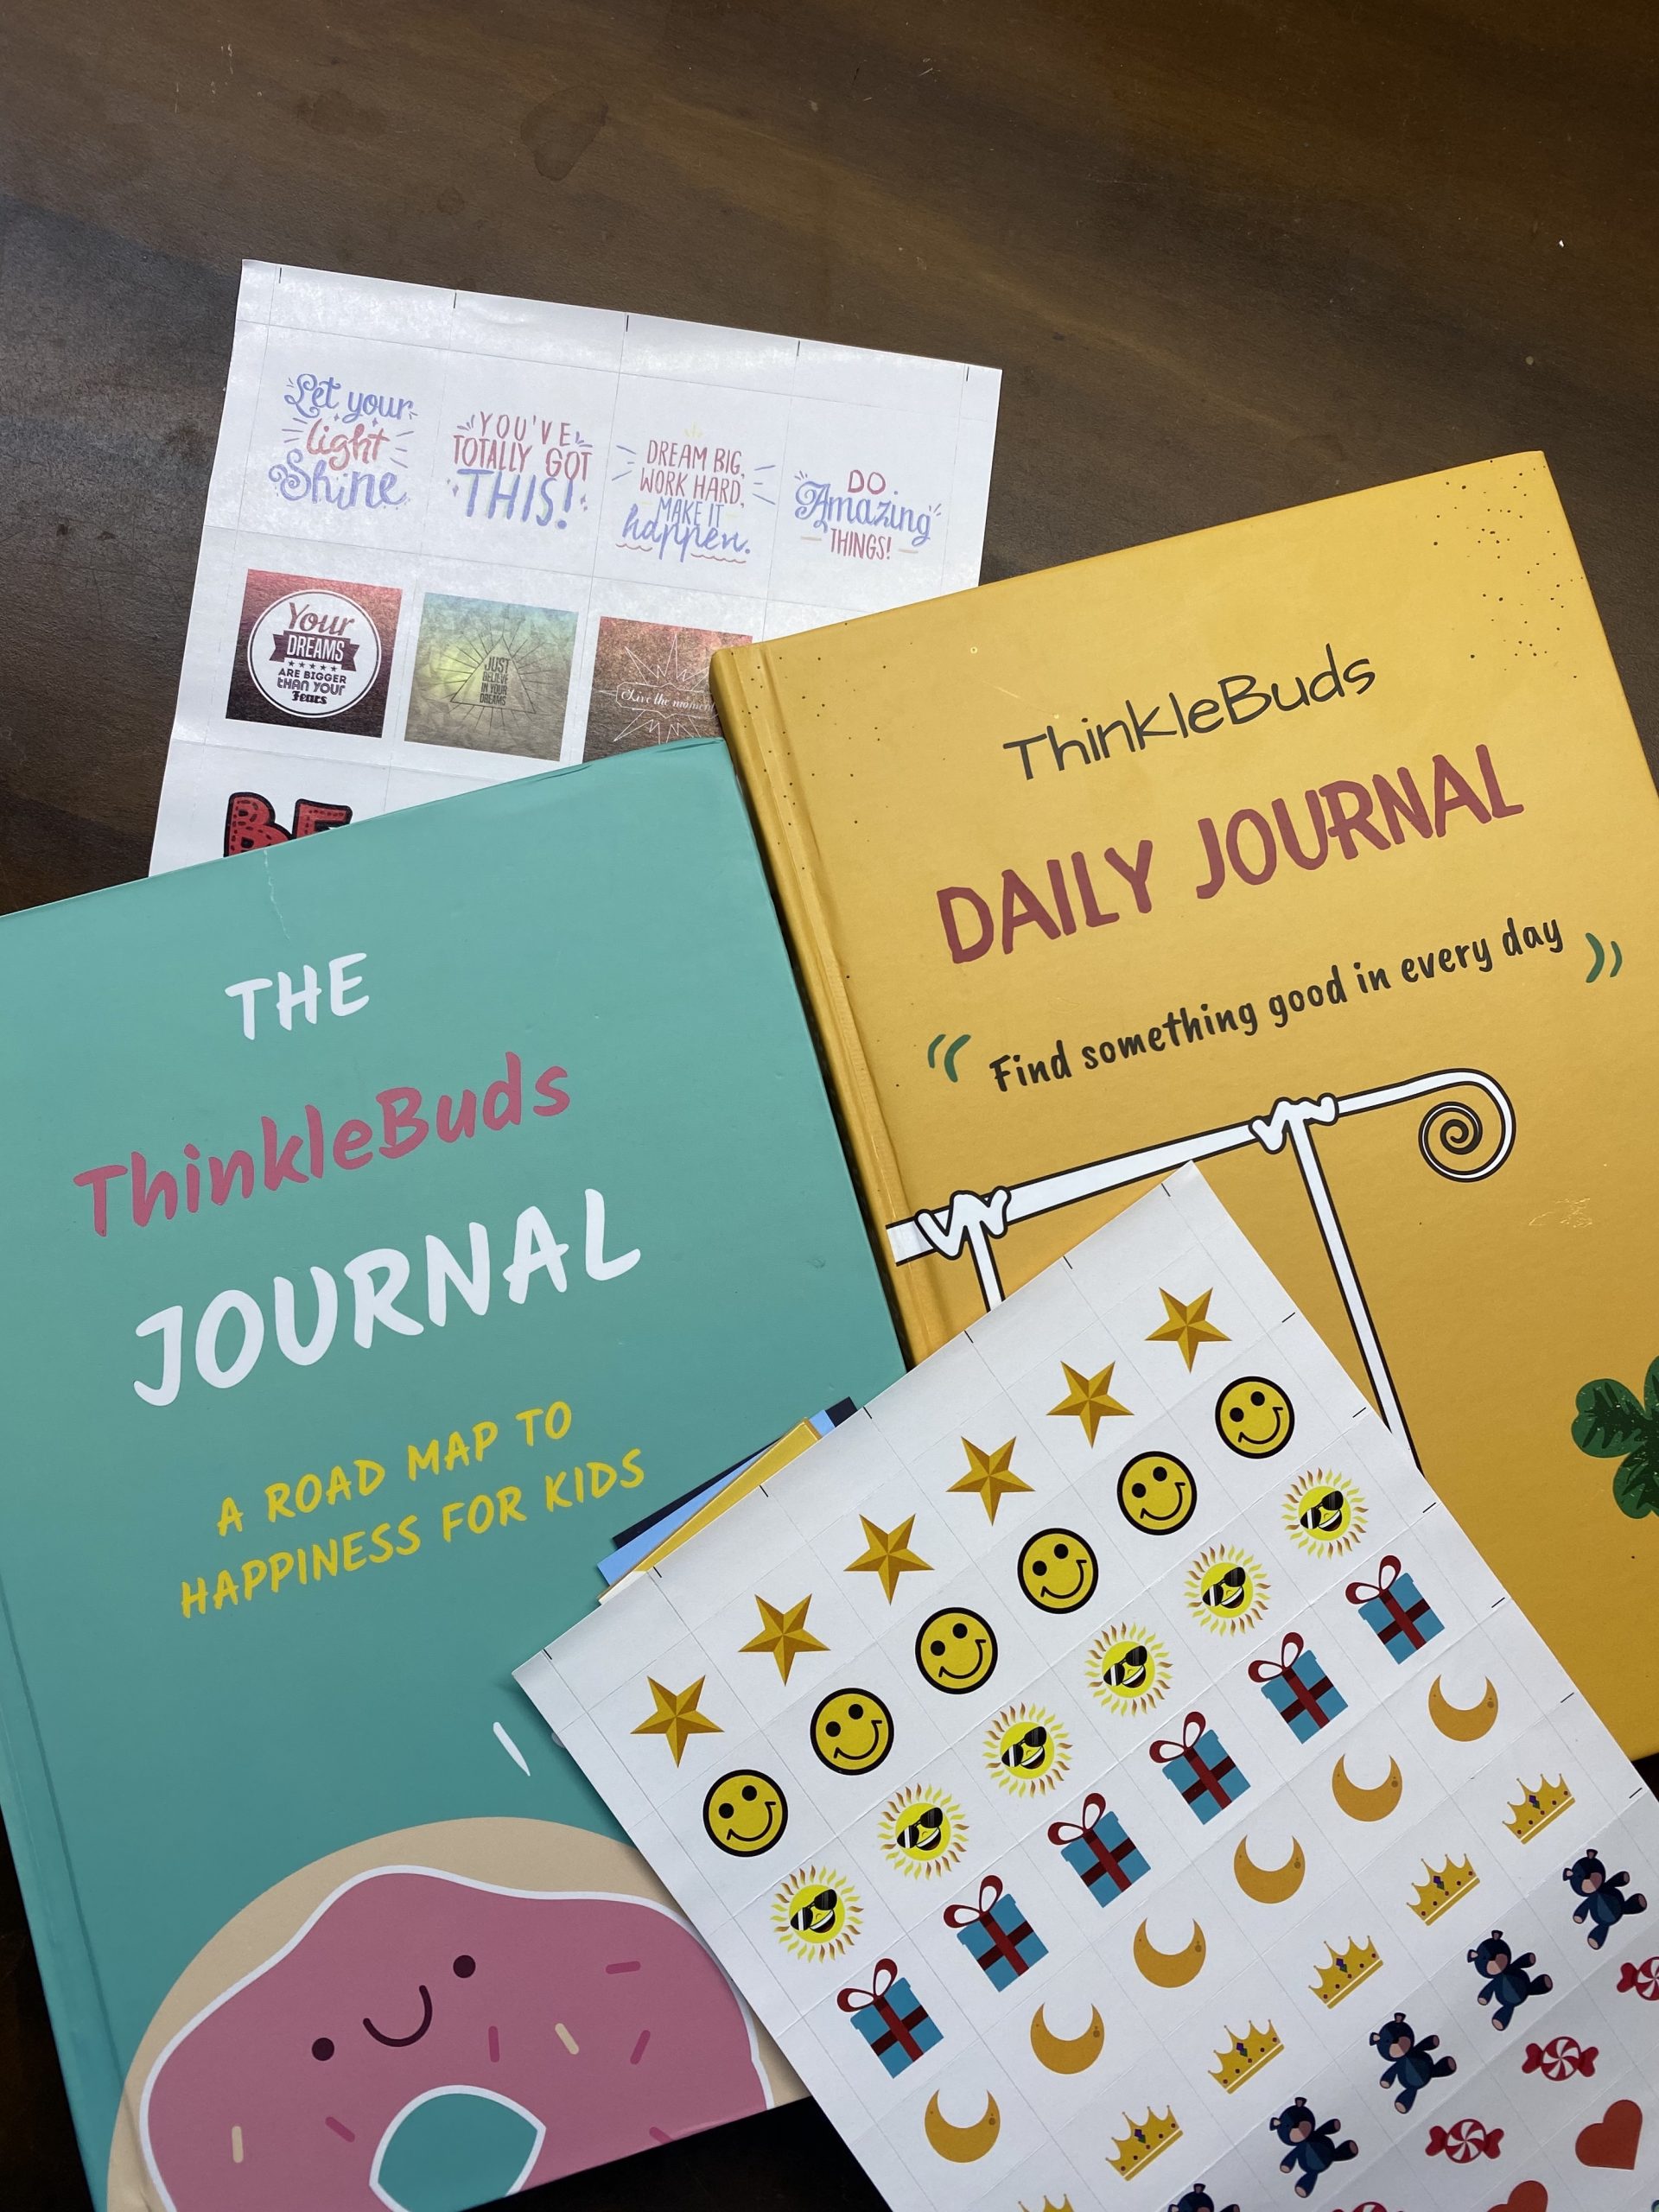 You are currently viewing ThinkleBuds- A refreshing new take on developing holistic skills that encompass social-emotional growth as well as life skills